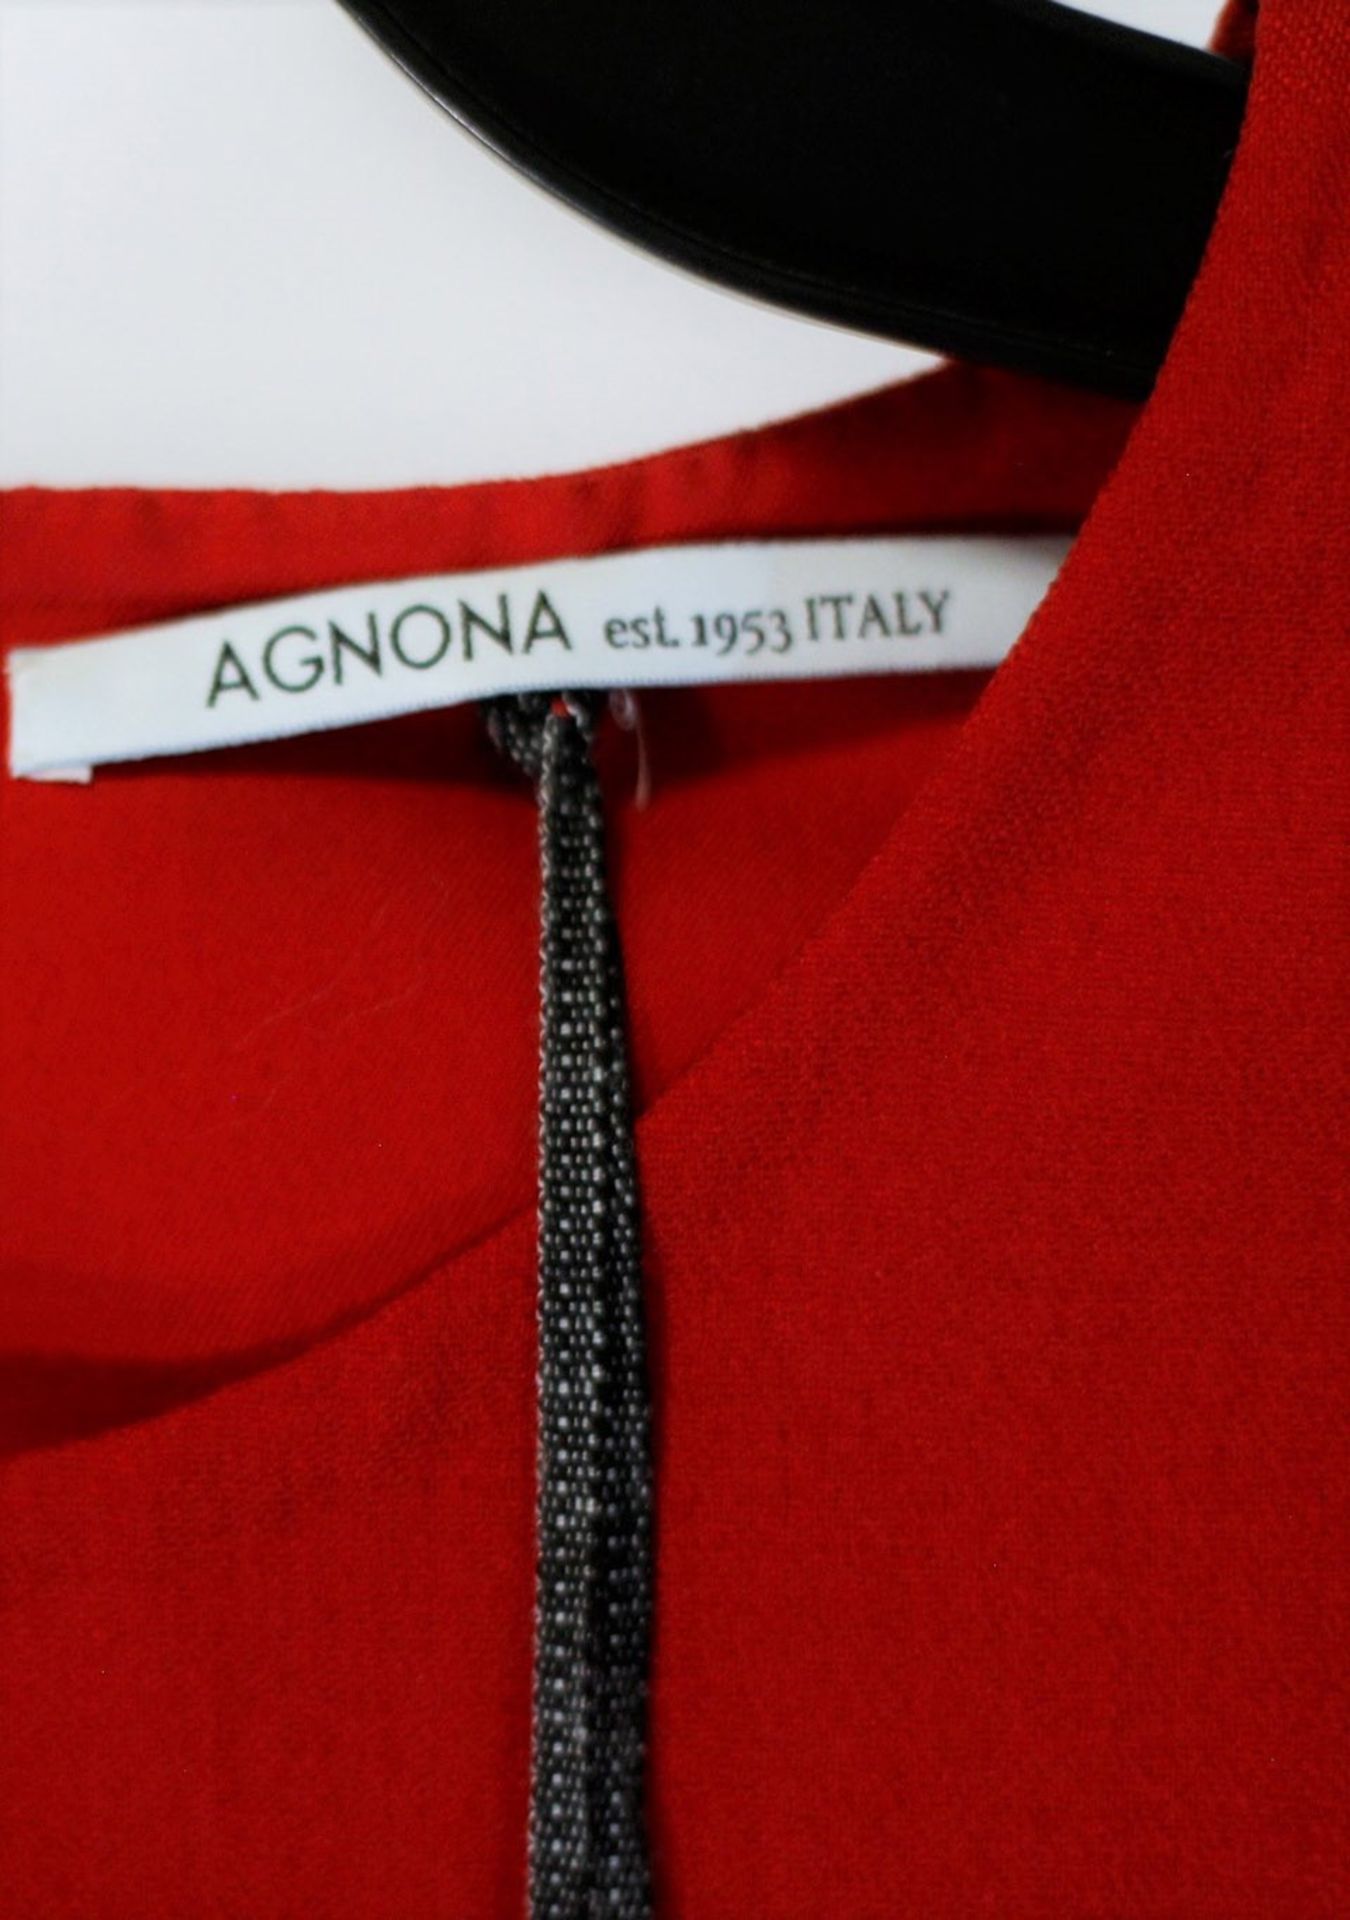 1 x Agnona Red Vest - Size: 18 - Material: 50% Cotton, 28% Mohair, 18% Silk, 4% Wool. Details 55% - Image 6 of 8